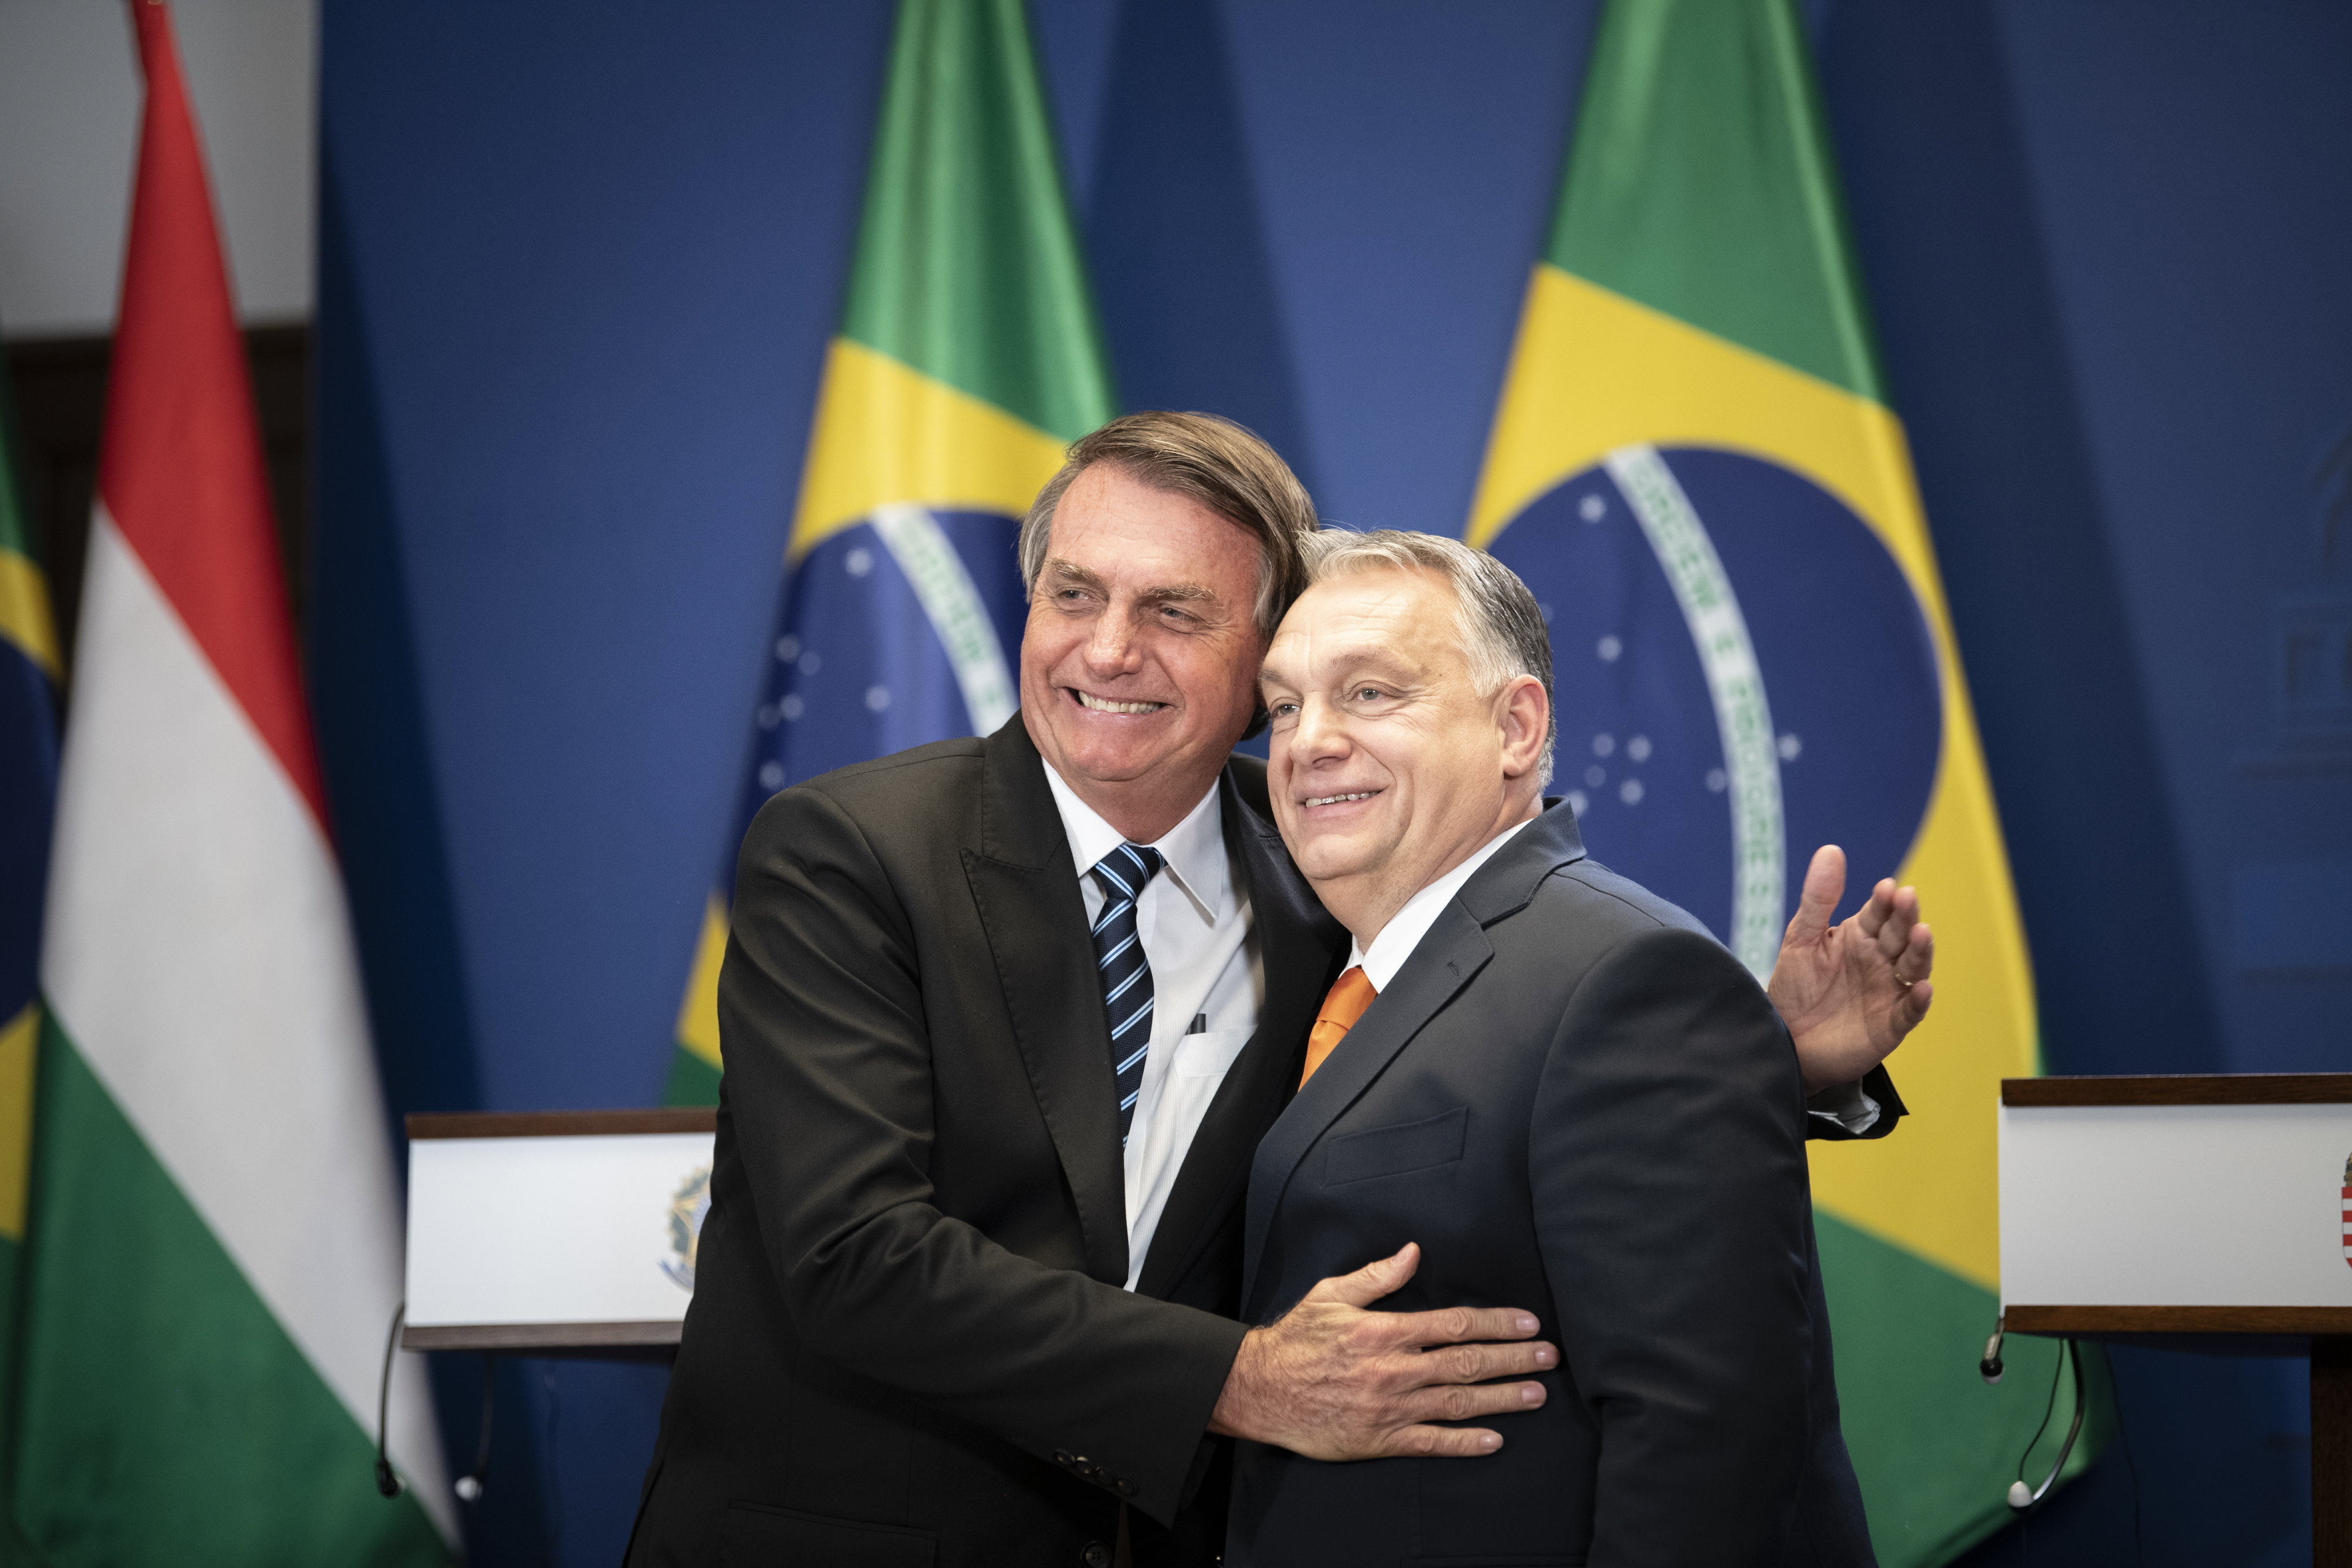 Orbán meets with Brazil's Bolsonaro in Budapest